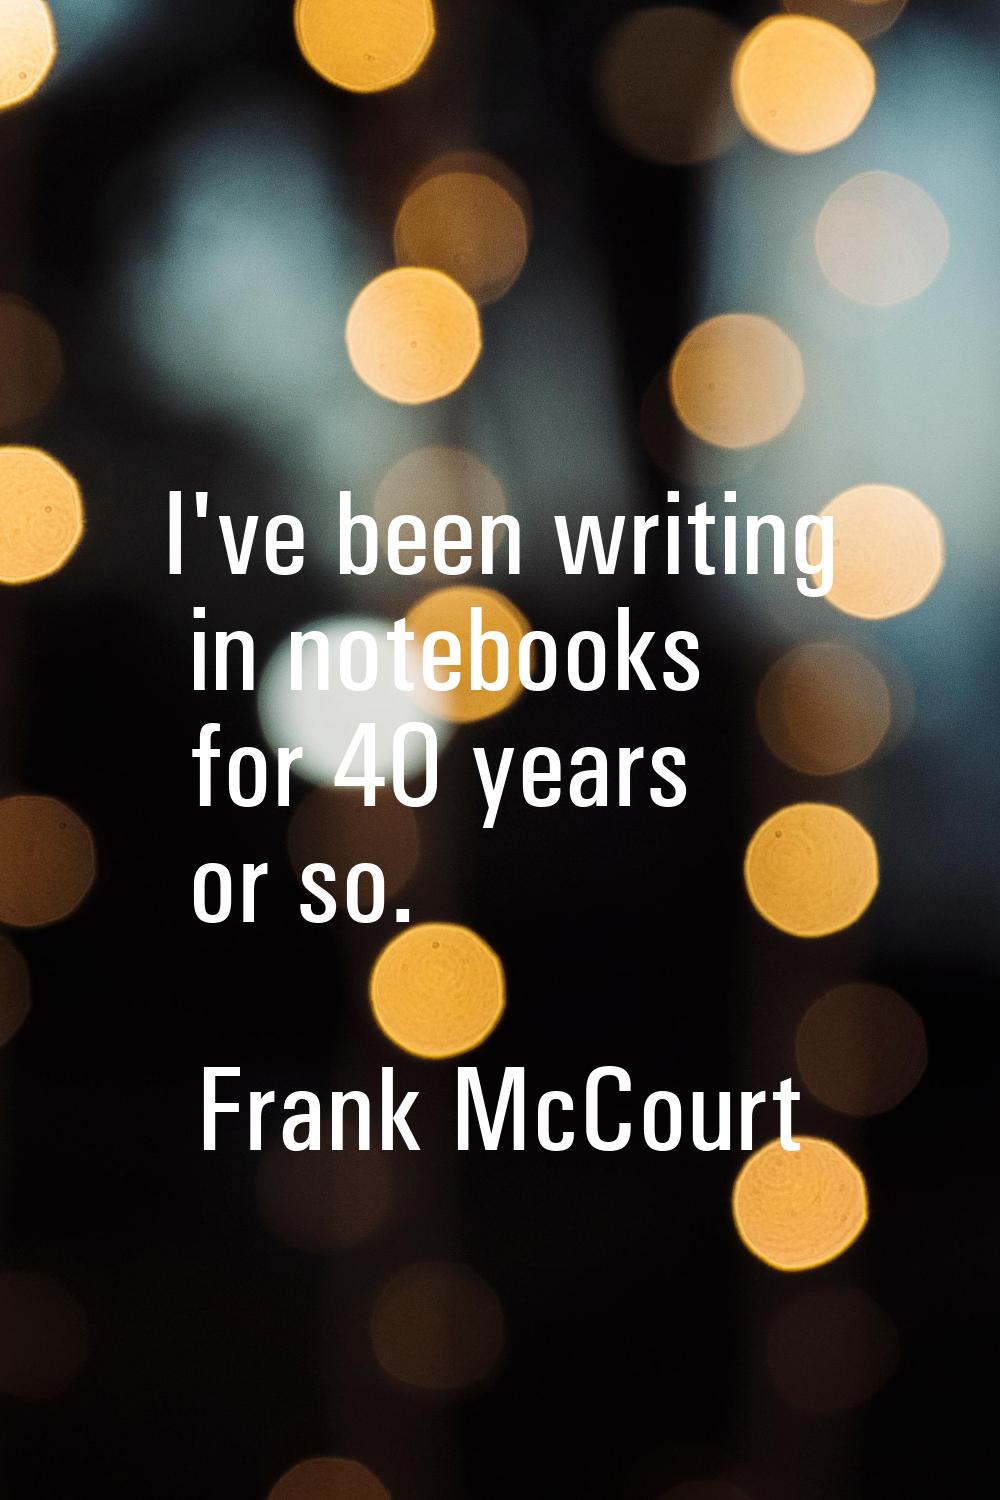 I've been writing in notebooks for 40 years or so.